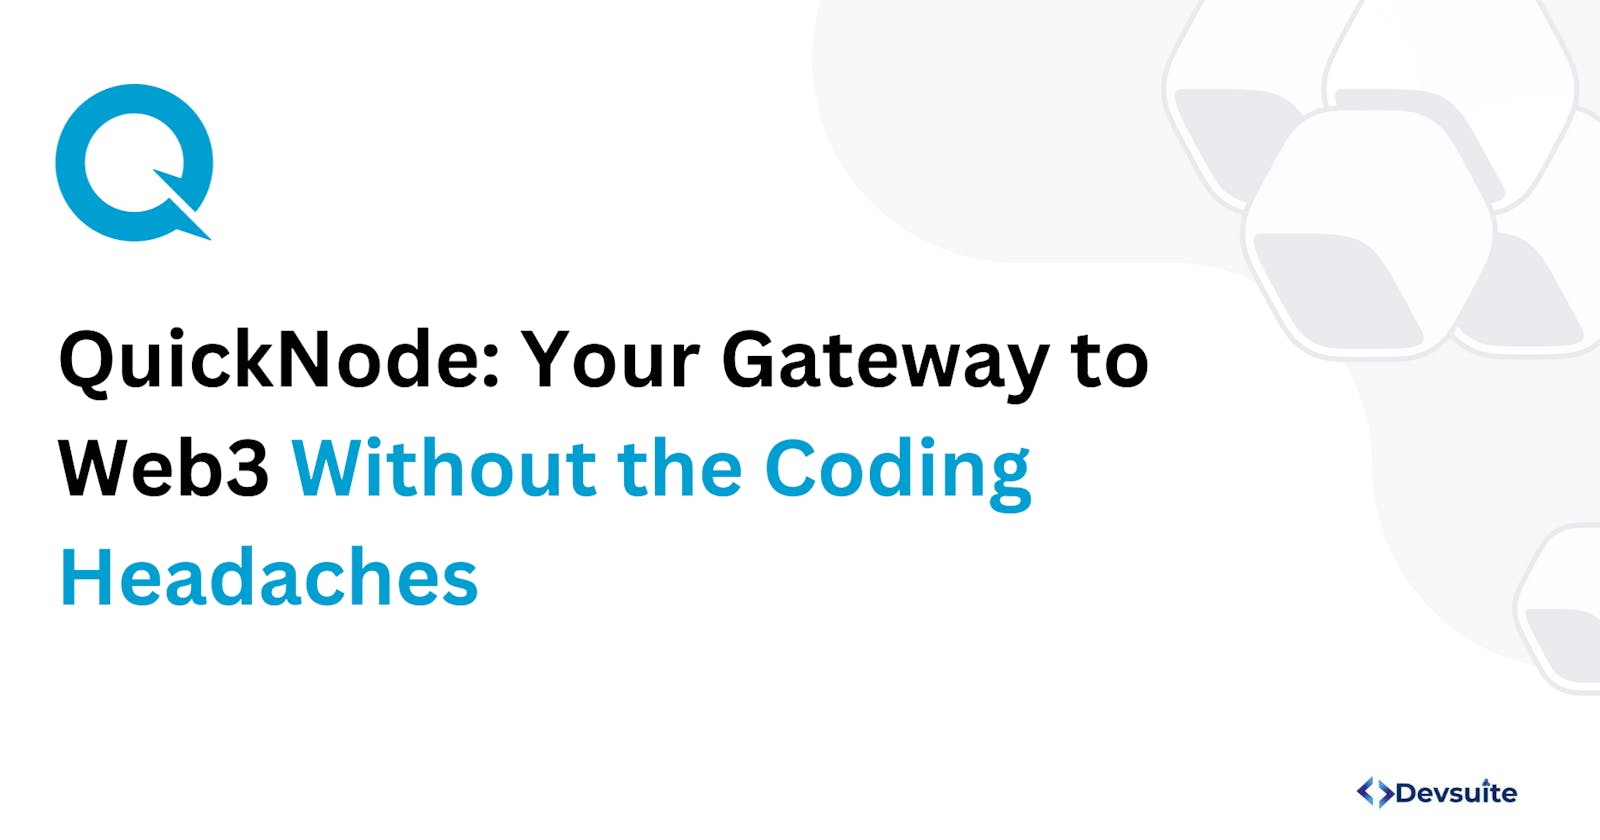 QuickNode: Your Gateway to Web3 Without the Coding Headaches